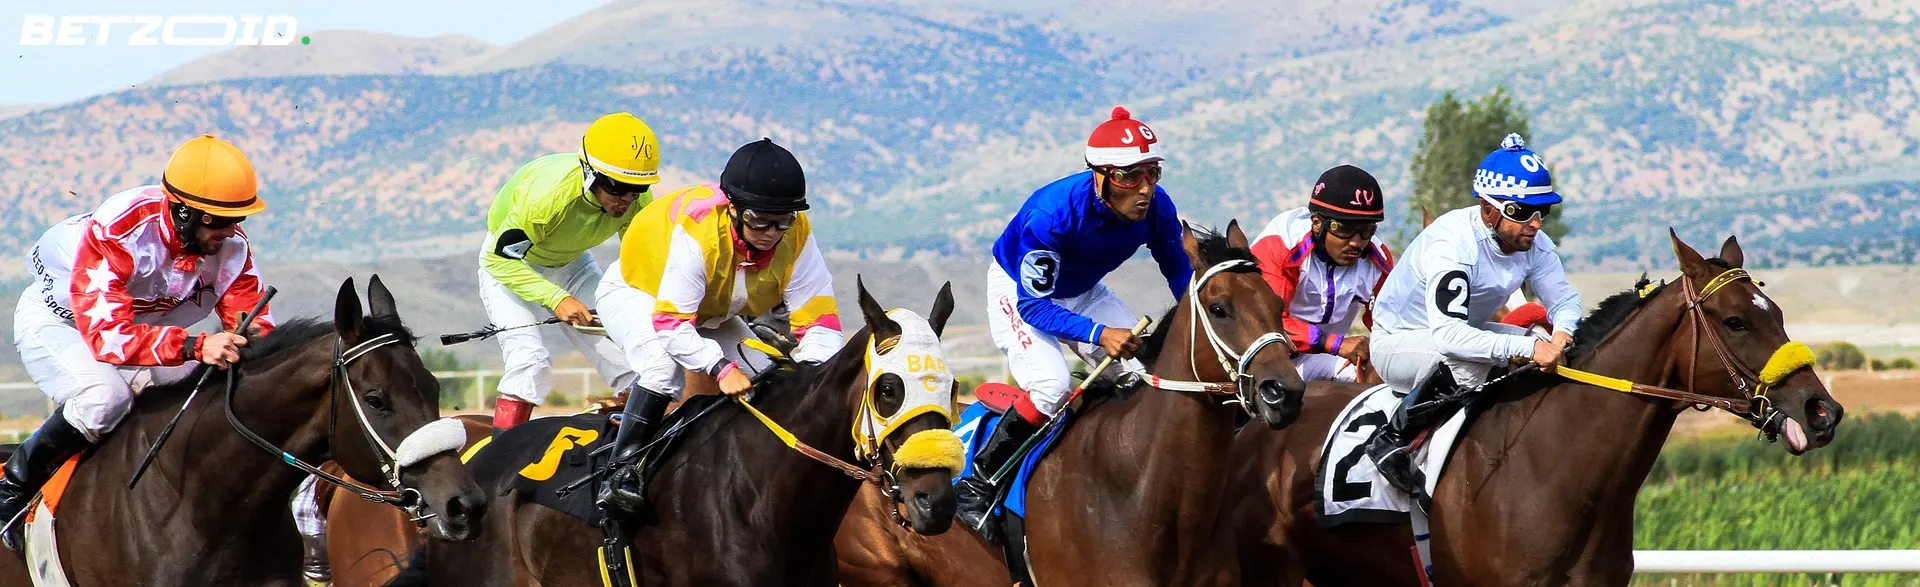 Intense horse racing action with jockeys in colorful gear, exemplifying the dynamic world of betting sites in Canada.